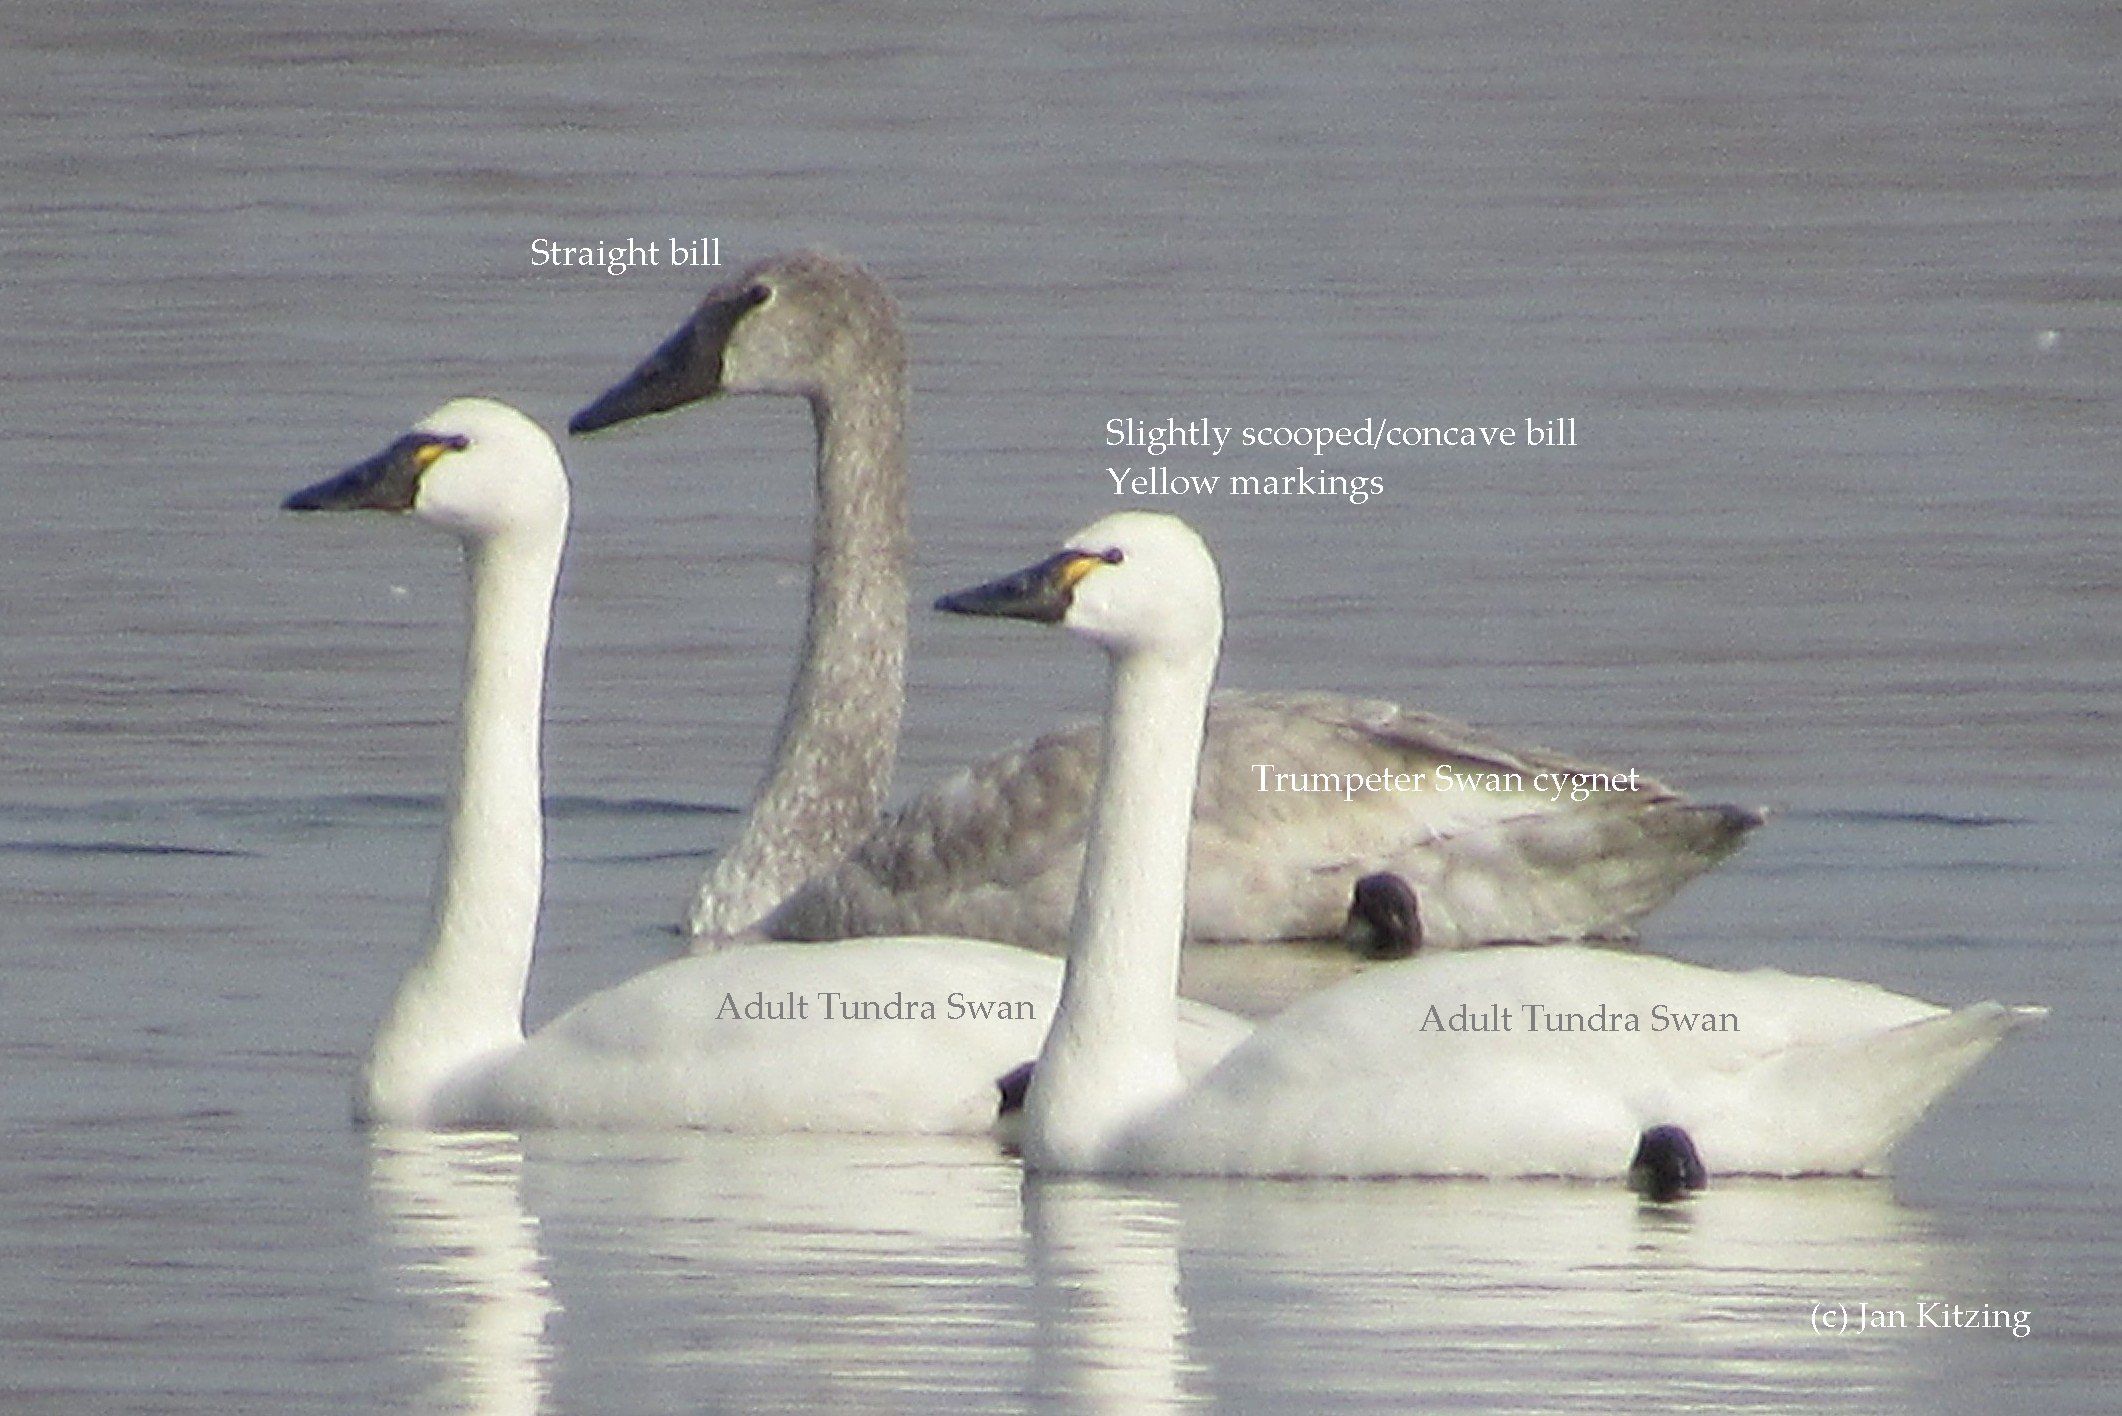 A visual comparison between Trumpeter Swan and Tundra Swan head and bill shapes